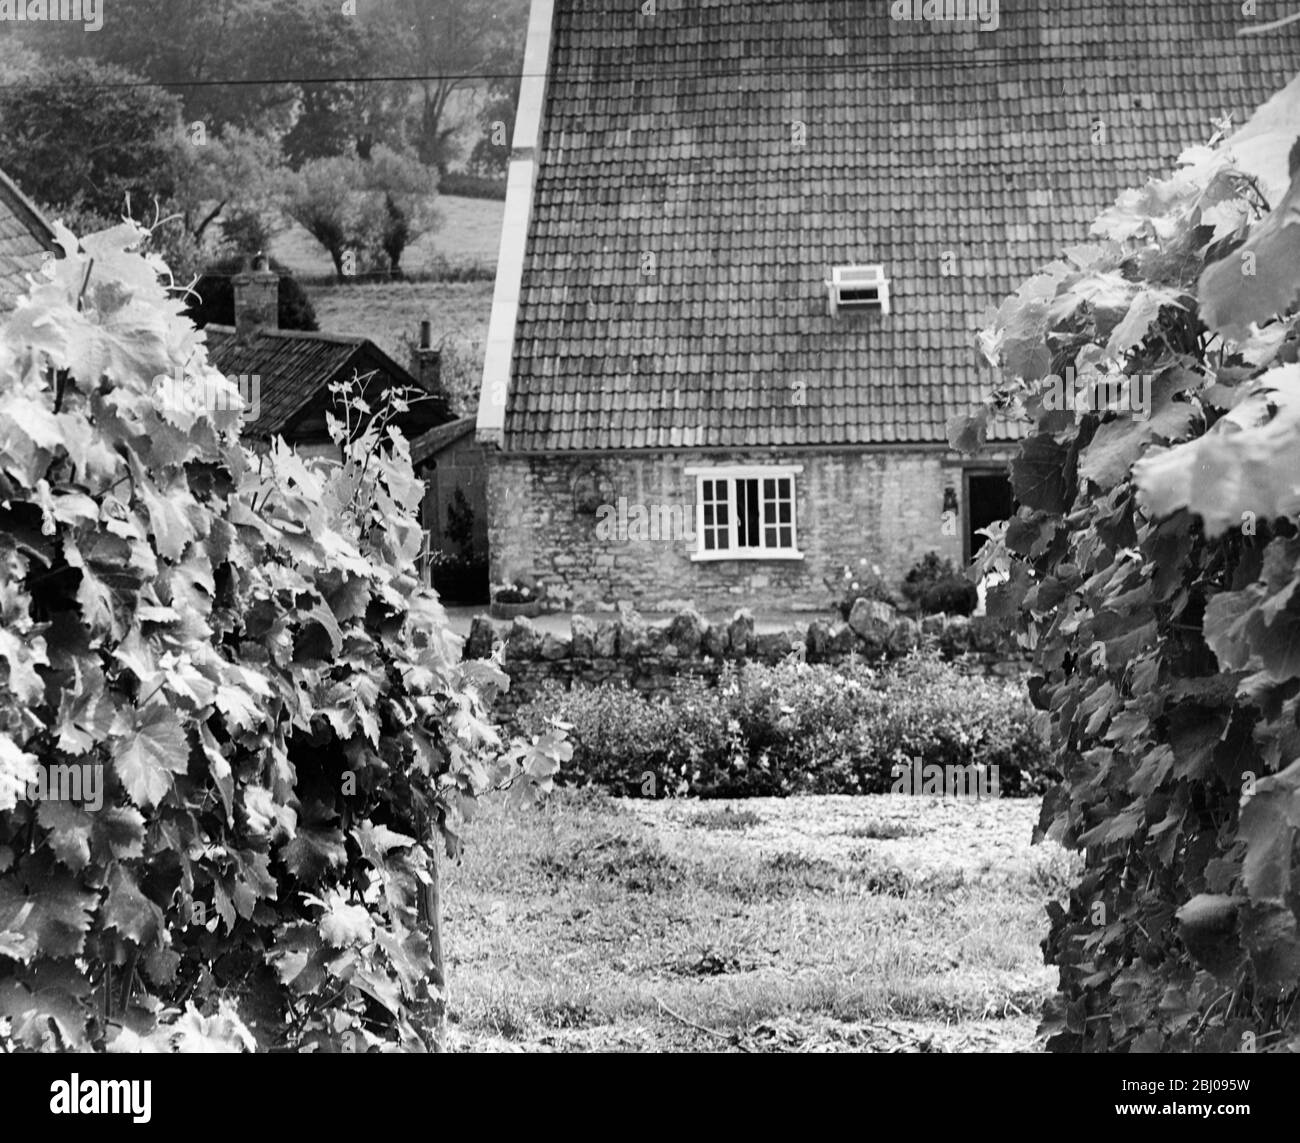 Wooton Vines - A general view of the vineyard and farm - Wootton Vineyard, Northtown, North Wootton, Shepton Mallet. Stock Photo